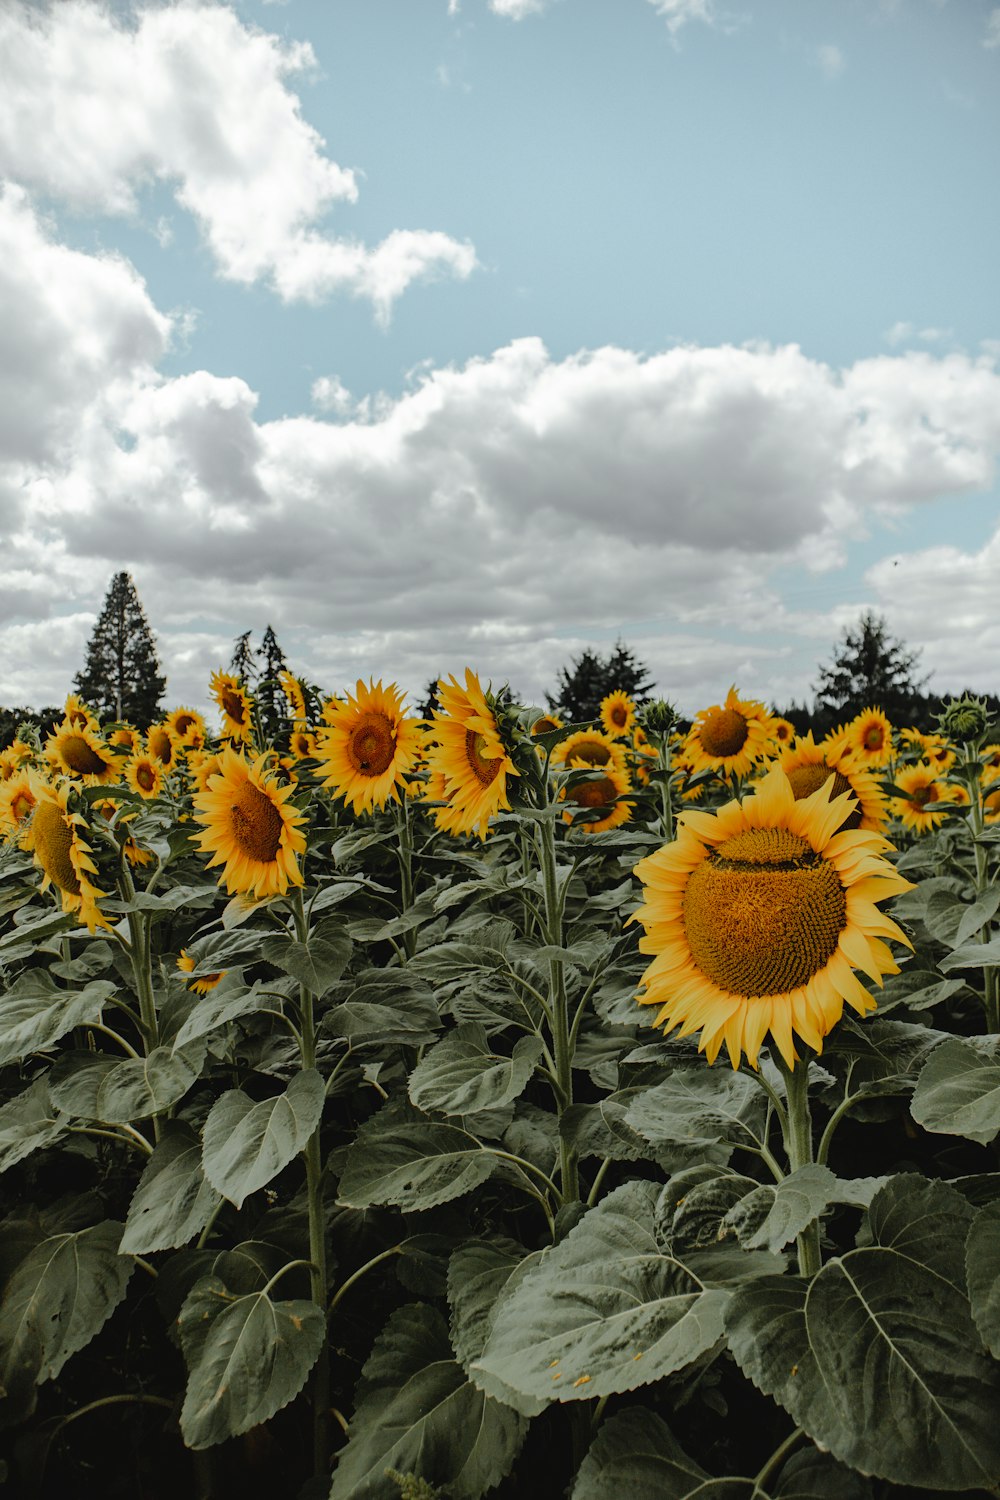 sunflower field under white clouds and blue sky during daytime